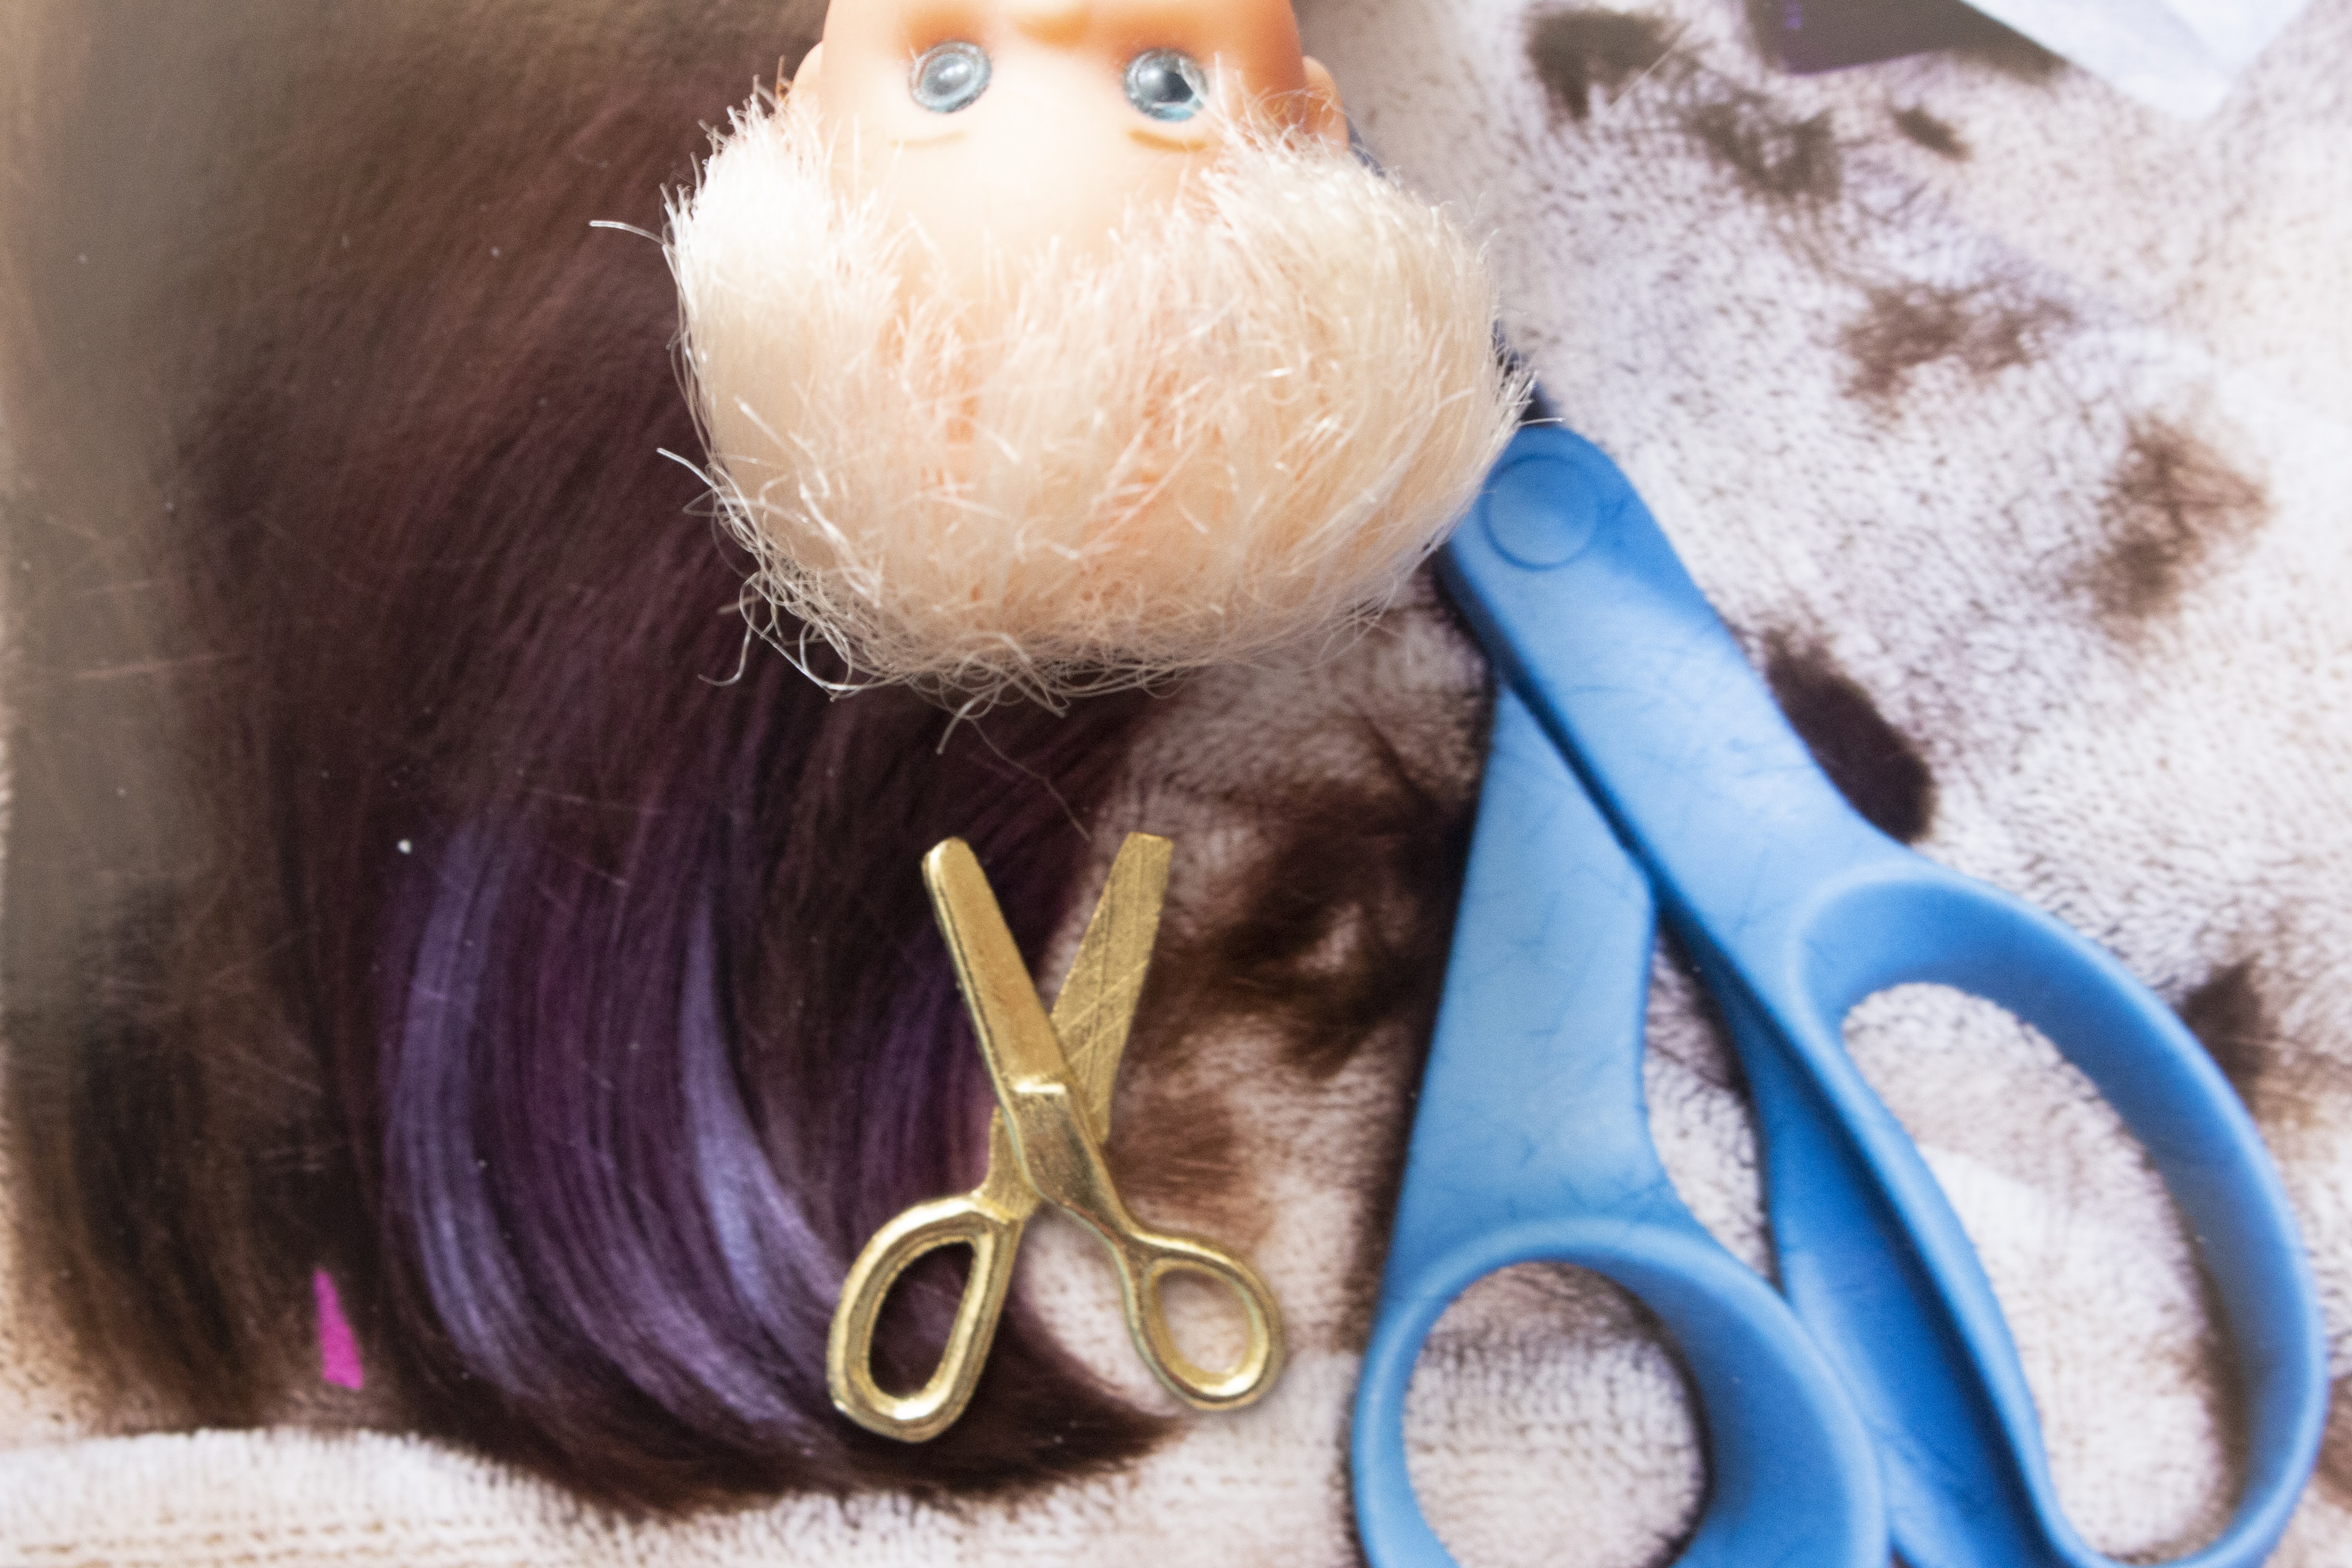 An upside down doll head and a miniature pair of scissors float over a background of a pair of scissors and cut hair